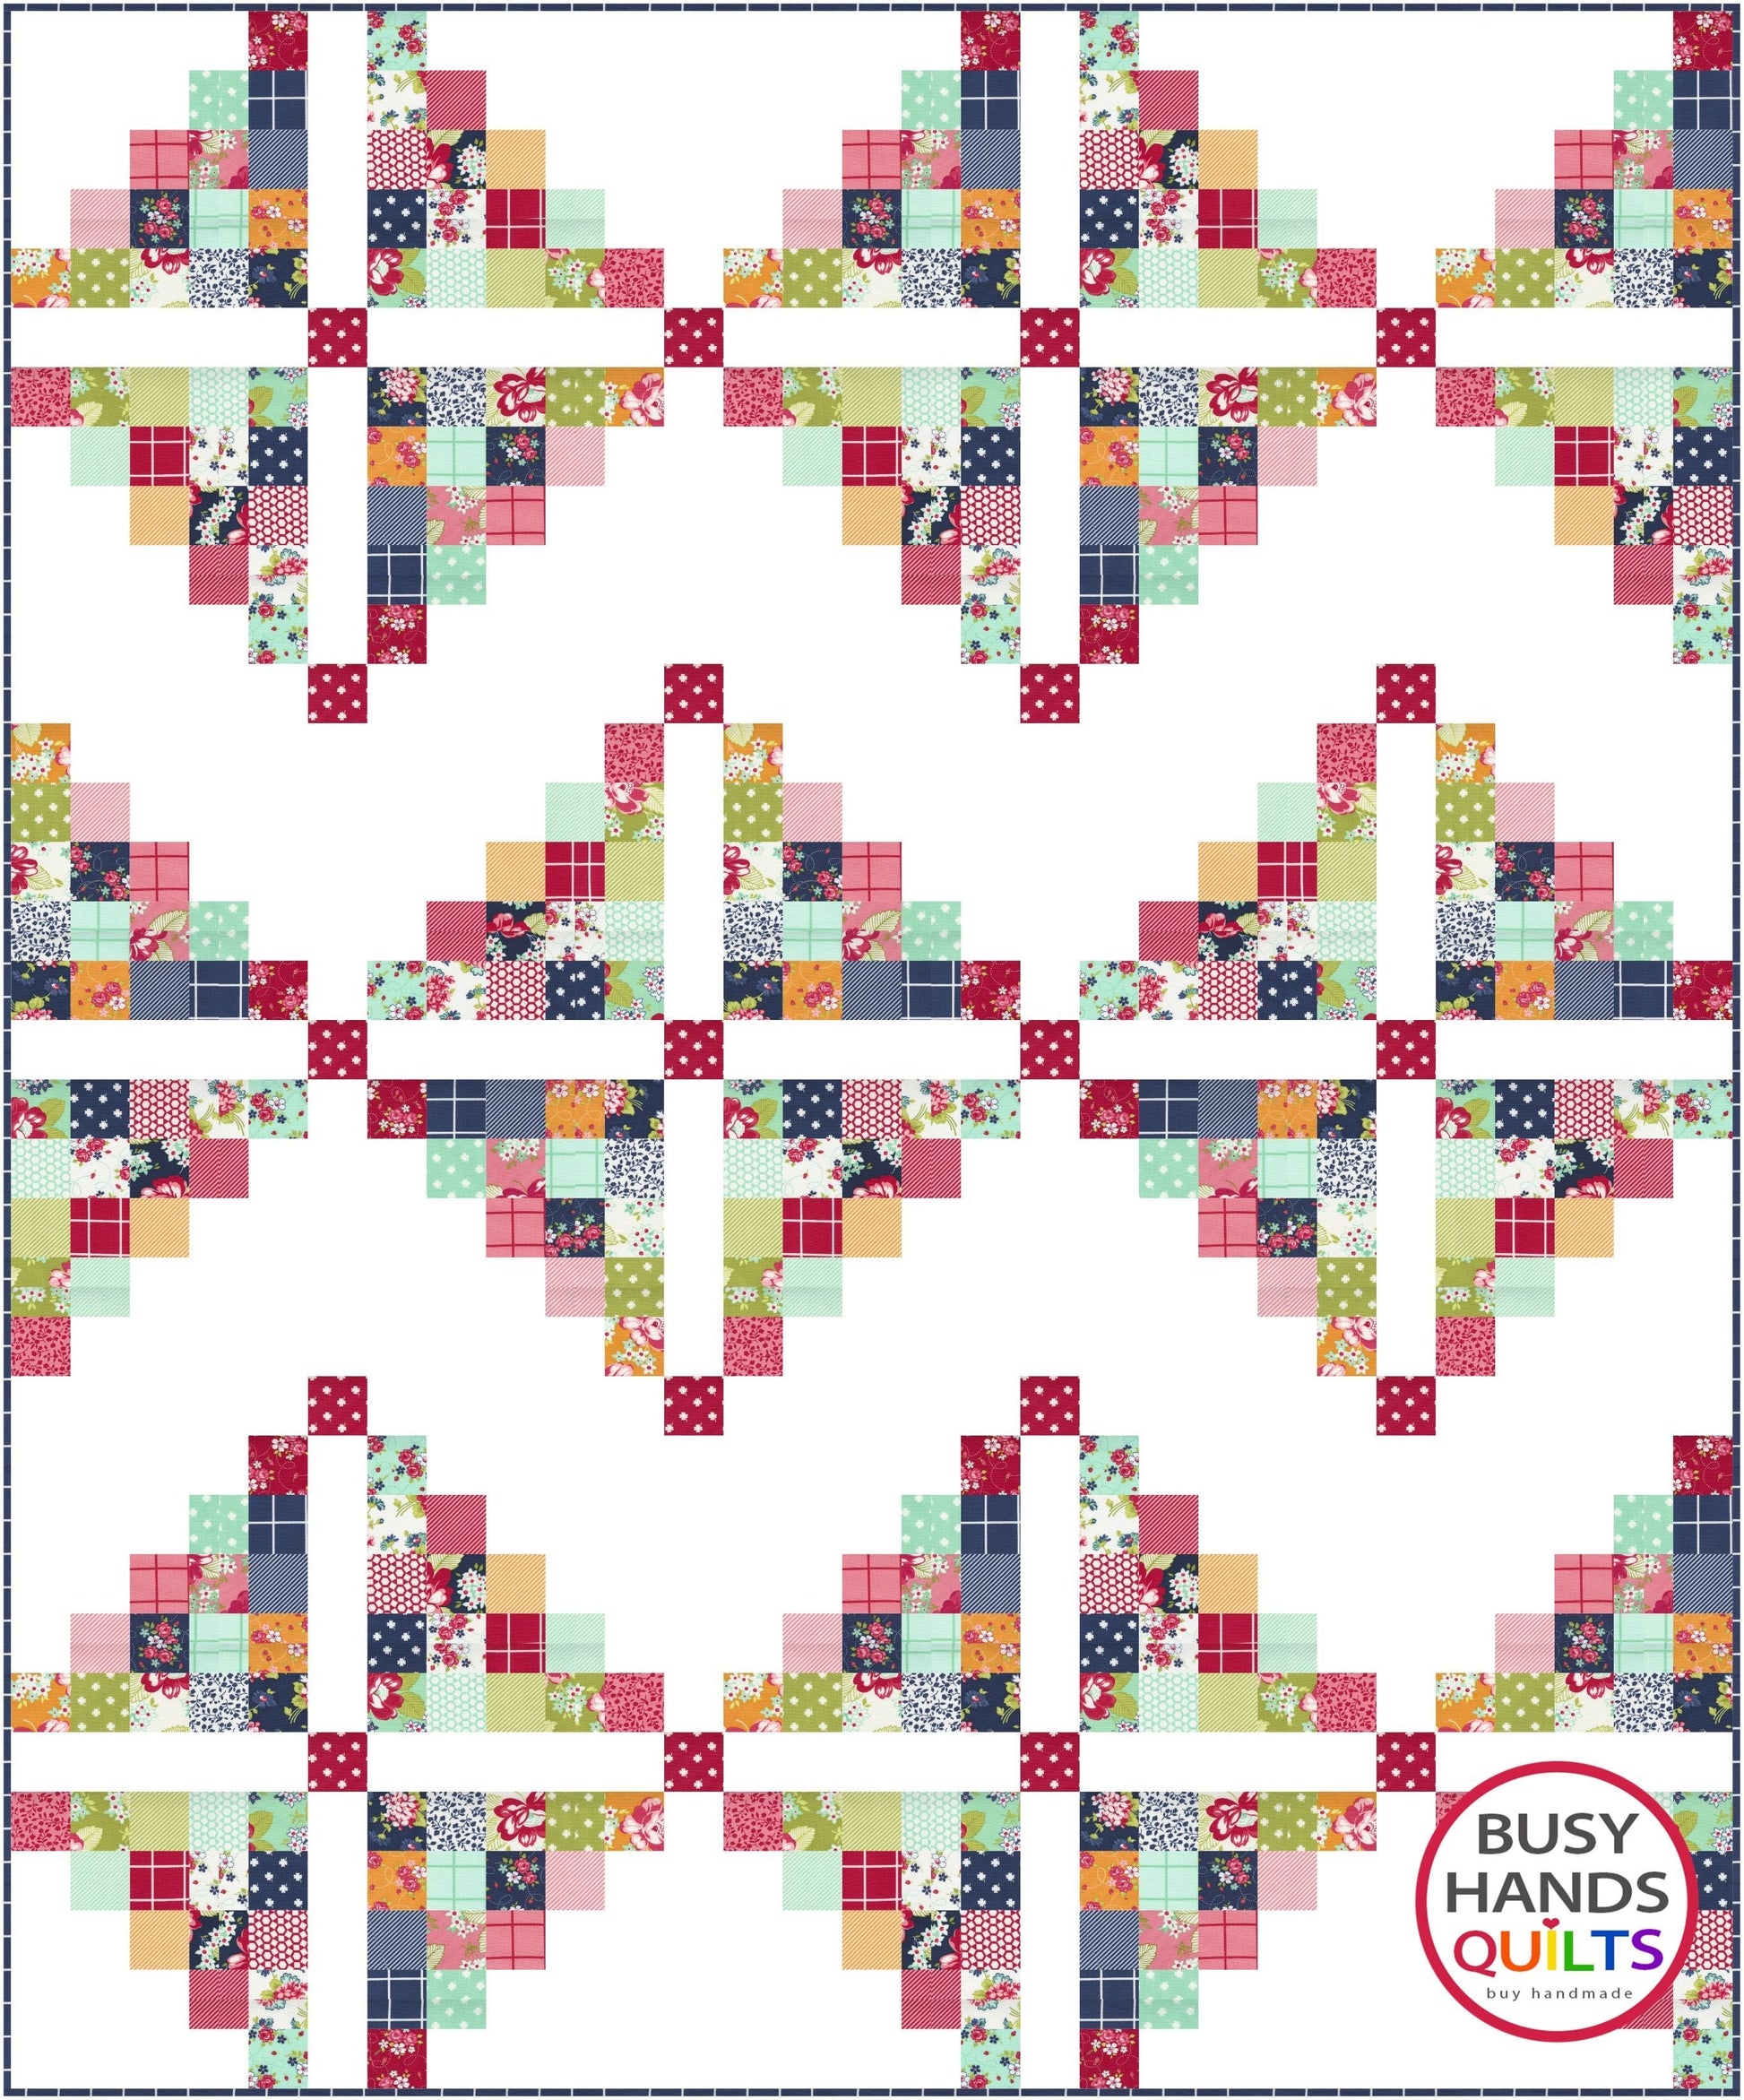 My Farmhouse Quilt Pattern PDF DOWNLOAD Busy Hands Quilts $12.99